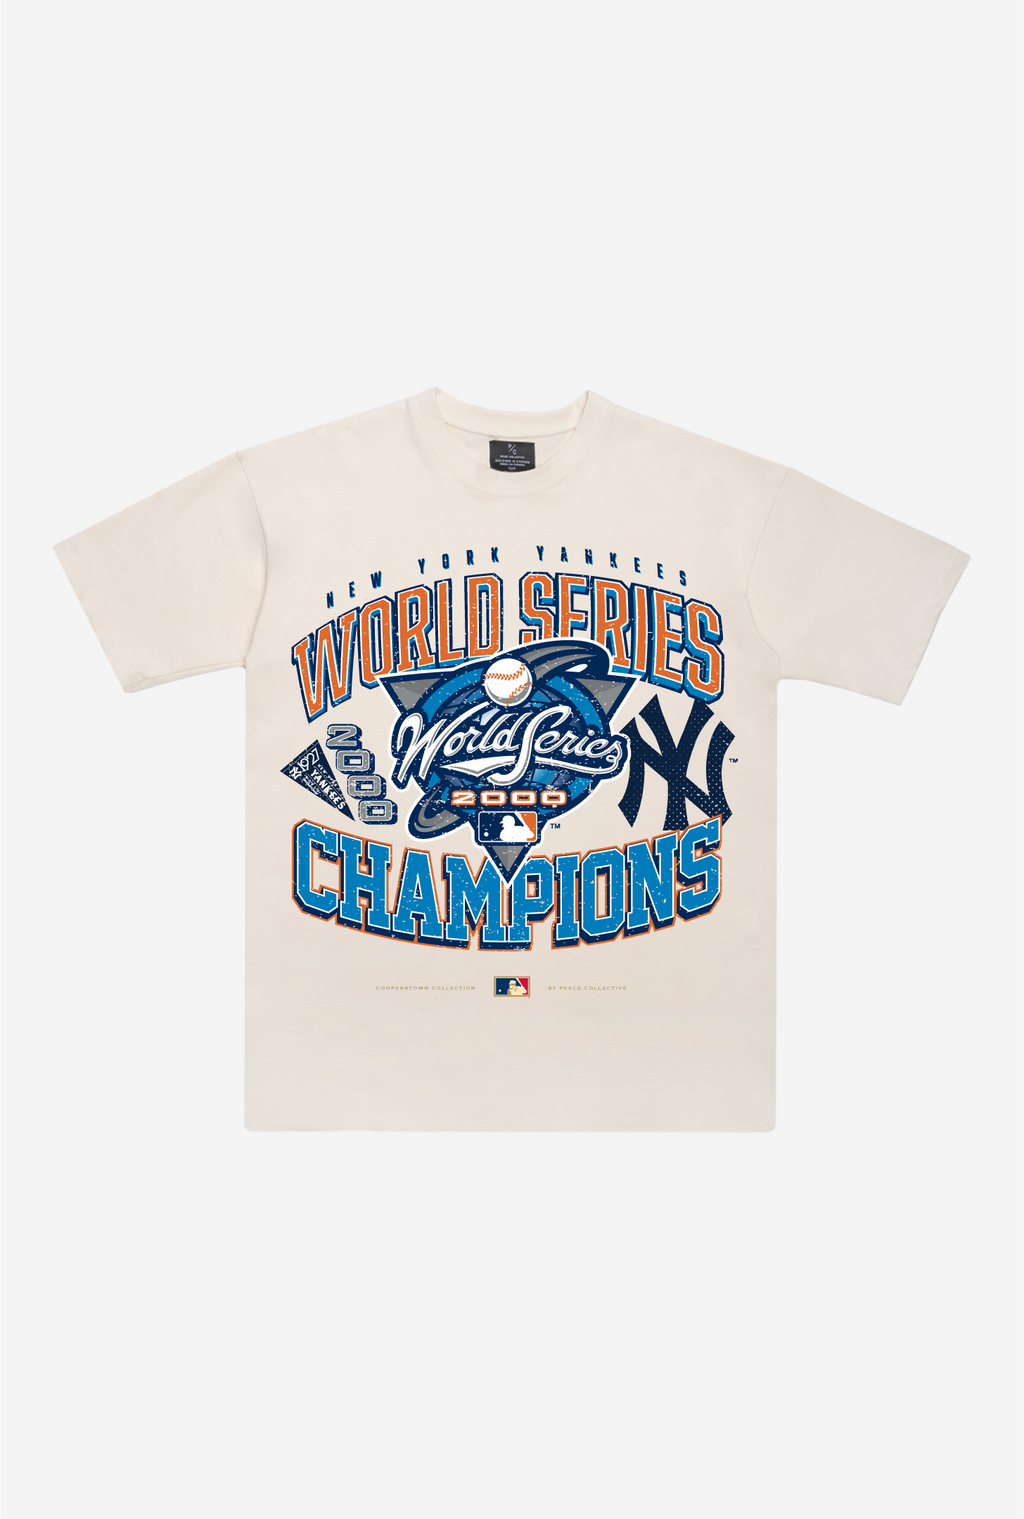 New York Yankees T-Shirt — Country Gone Crazy